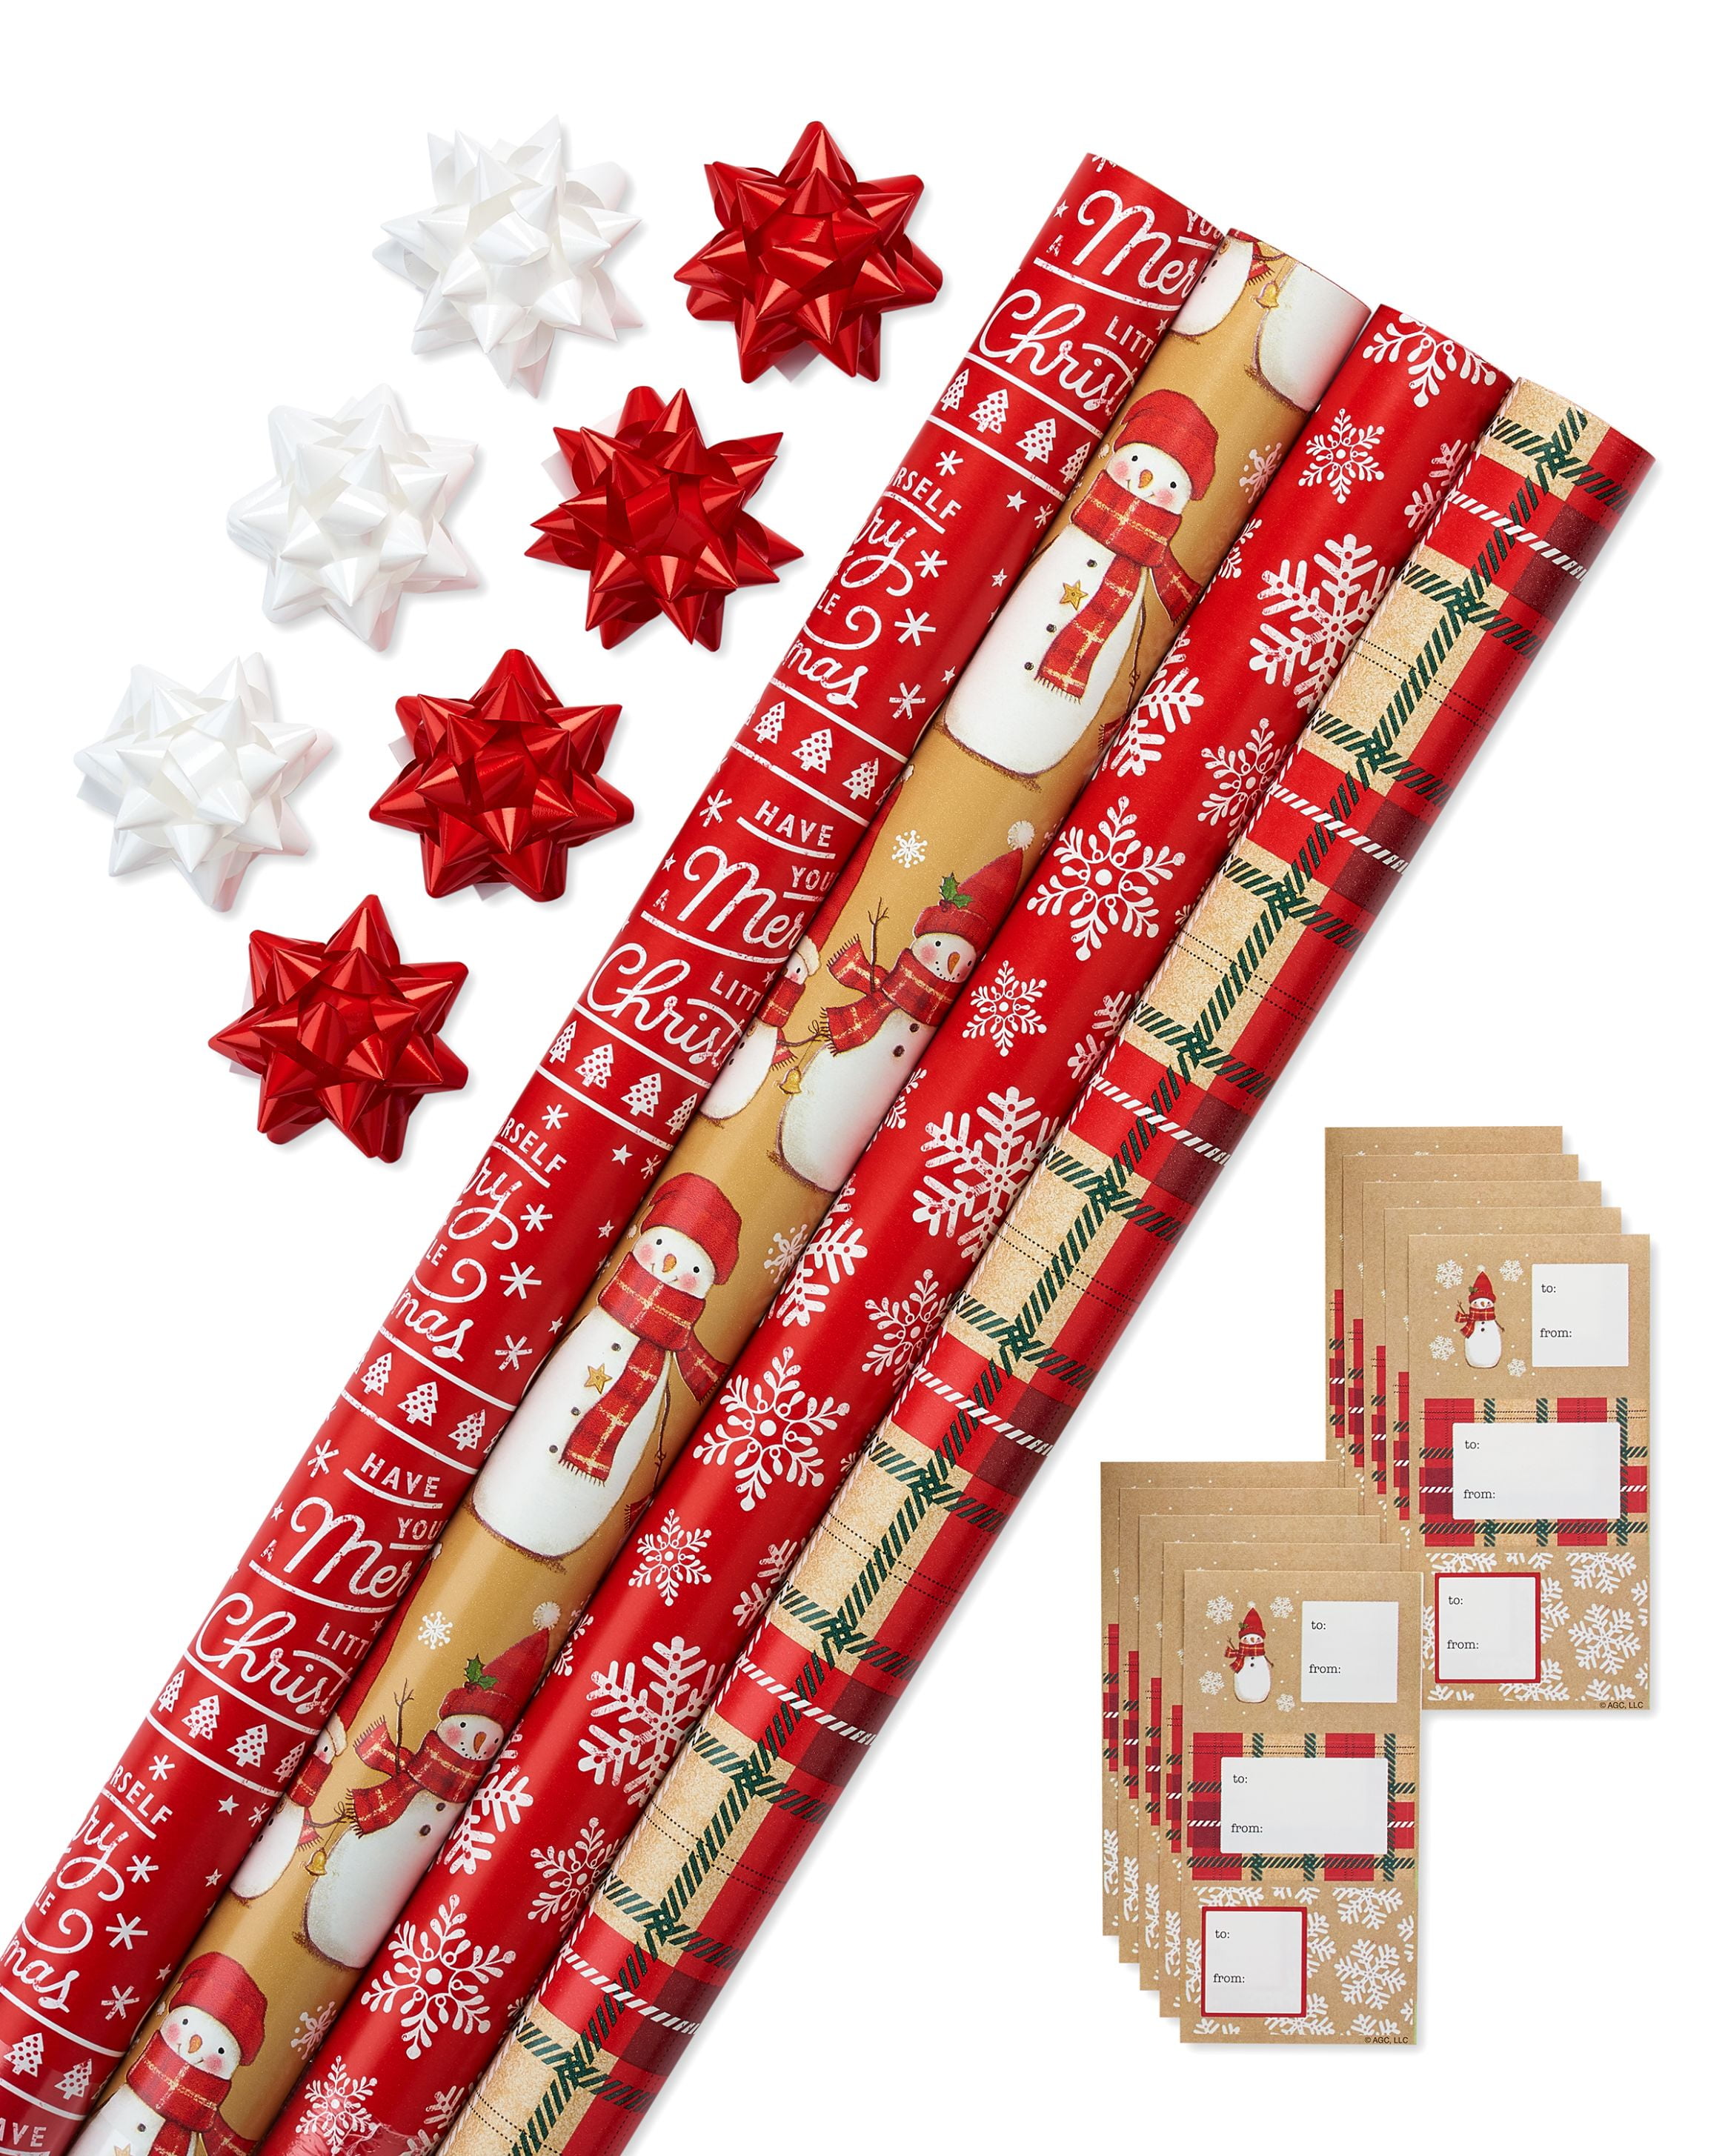 Christmas Wrapping Paper Ensemble with Bows and Gift Tags, Red, Black and  White, Plaid, Script, Reindeer and Snowflakes, 41-Count